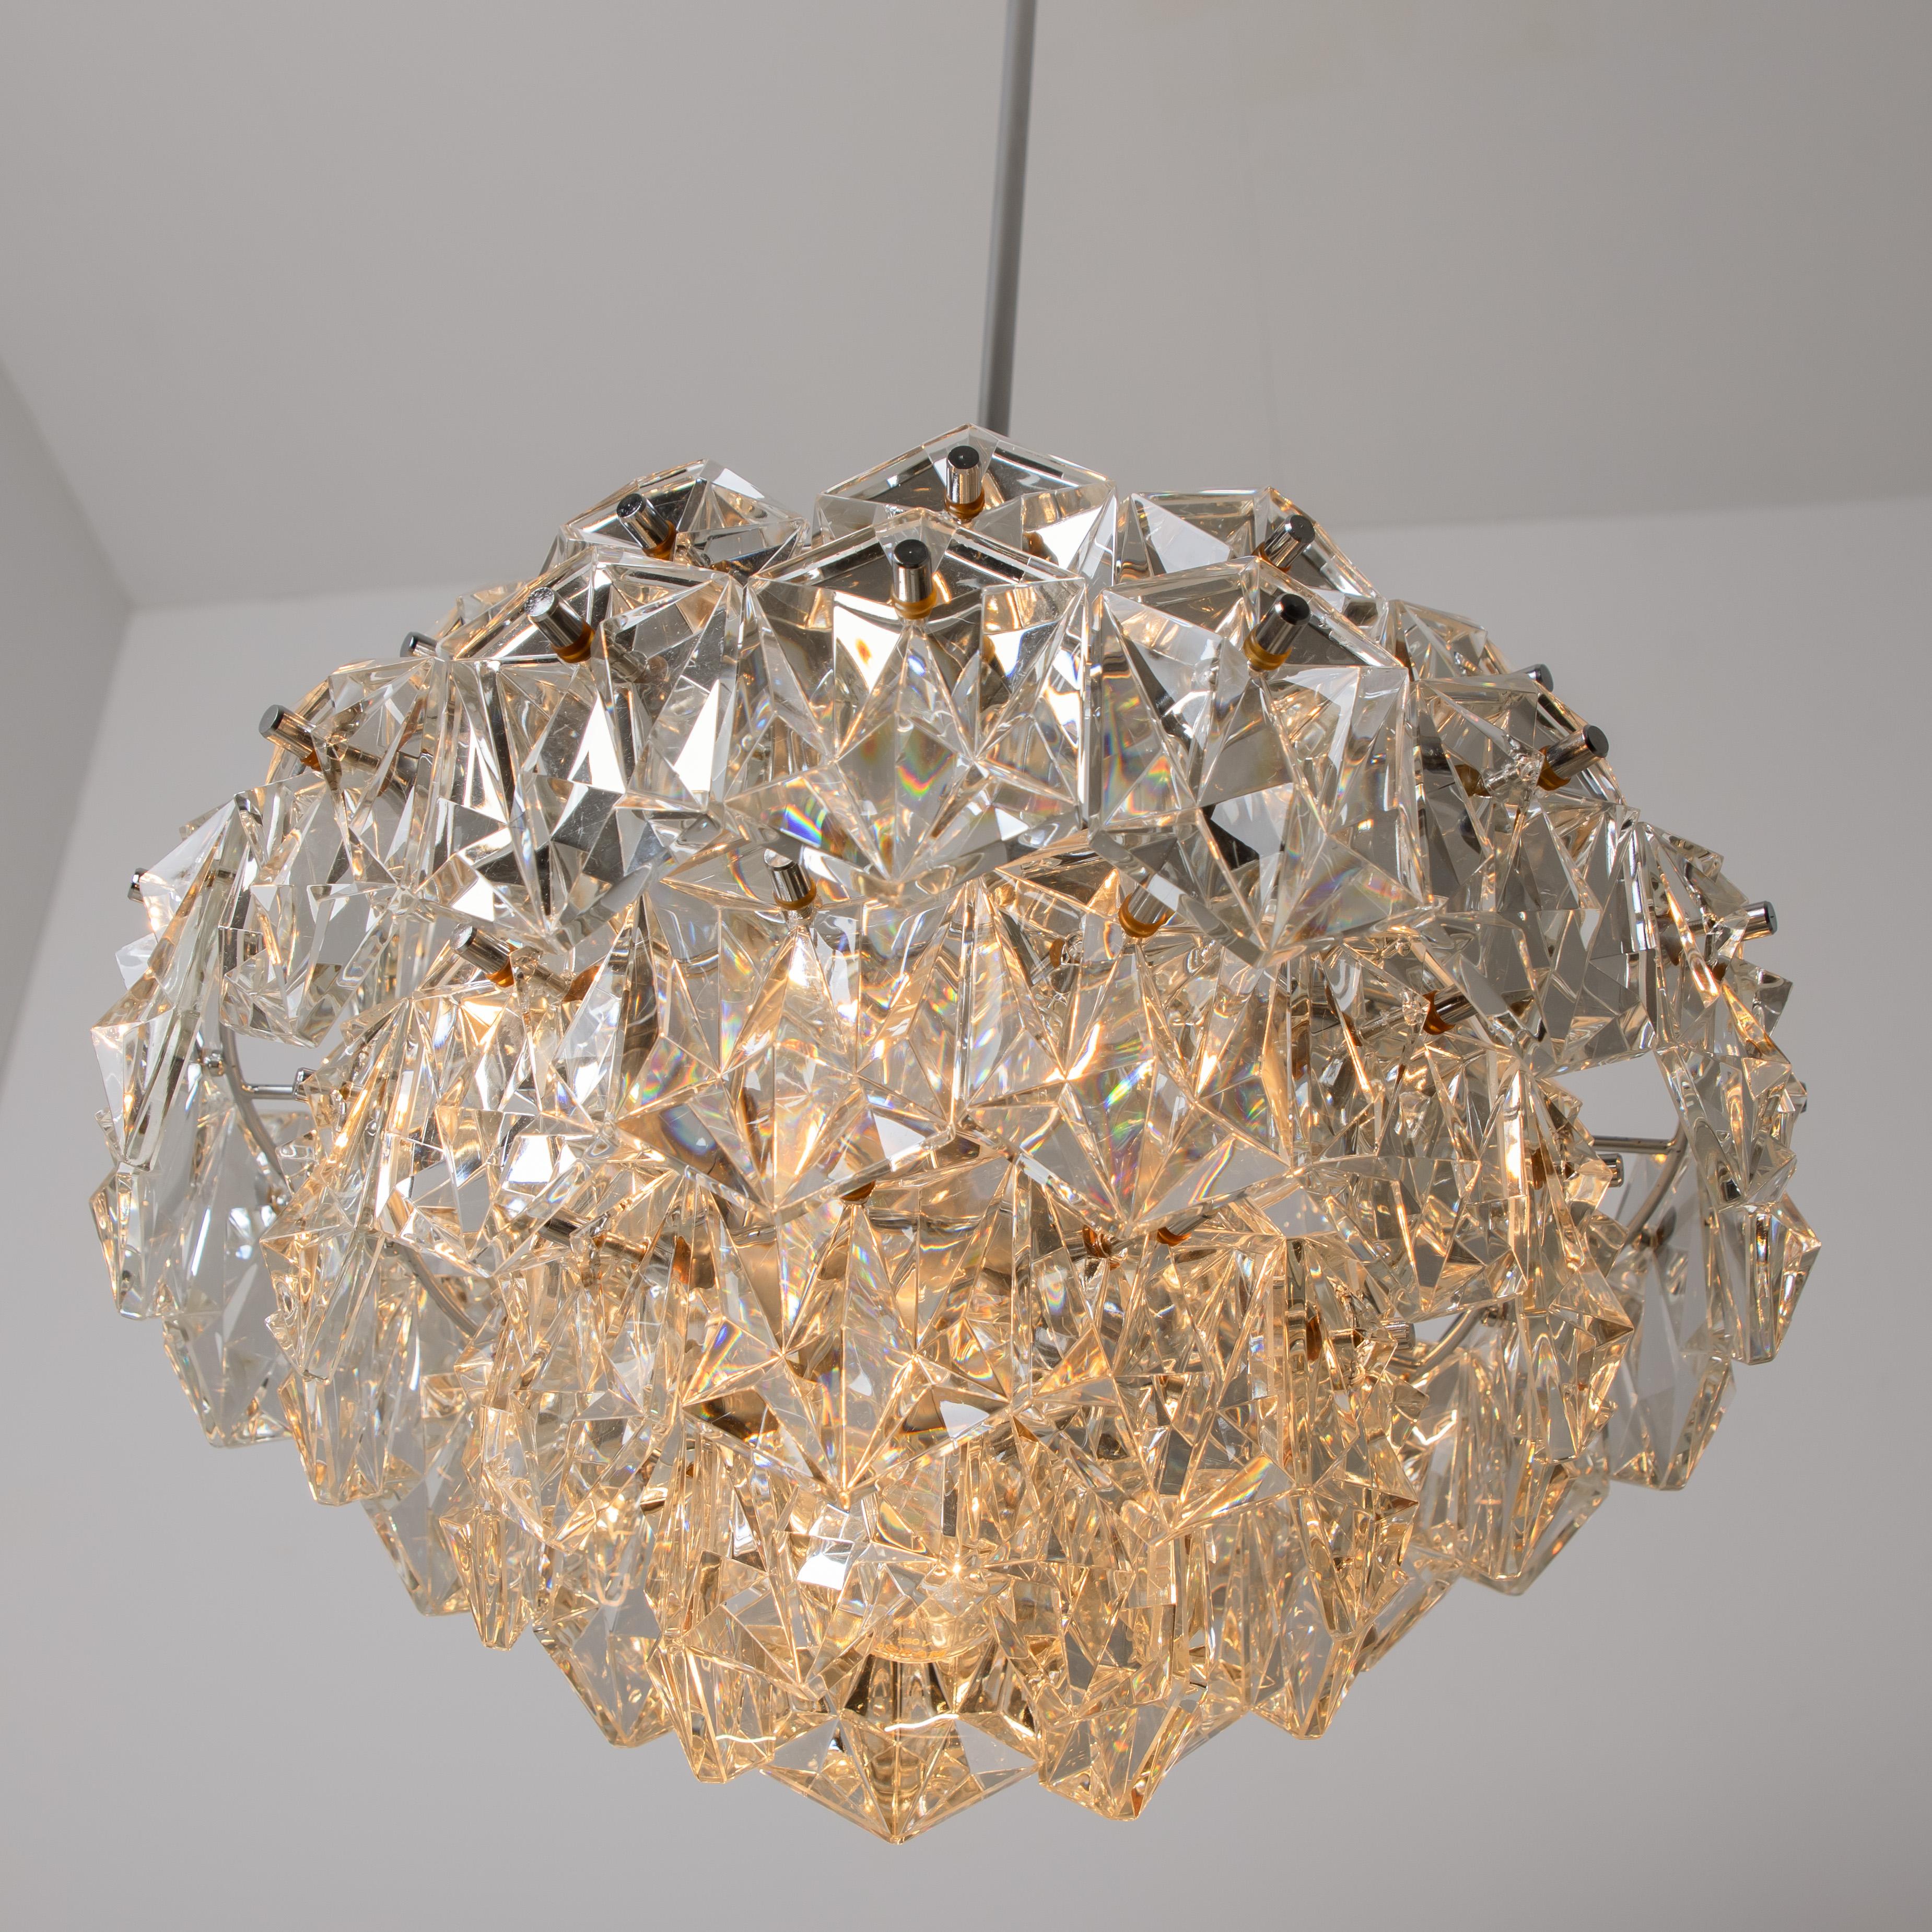 This modernist design chandelier is designed by the OTT International design team during the 1970s, and manufactured in Germany. This chandeliers are executed to a very high standard: All metal parts are chrome plated, even the lamp sockets and